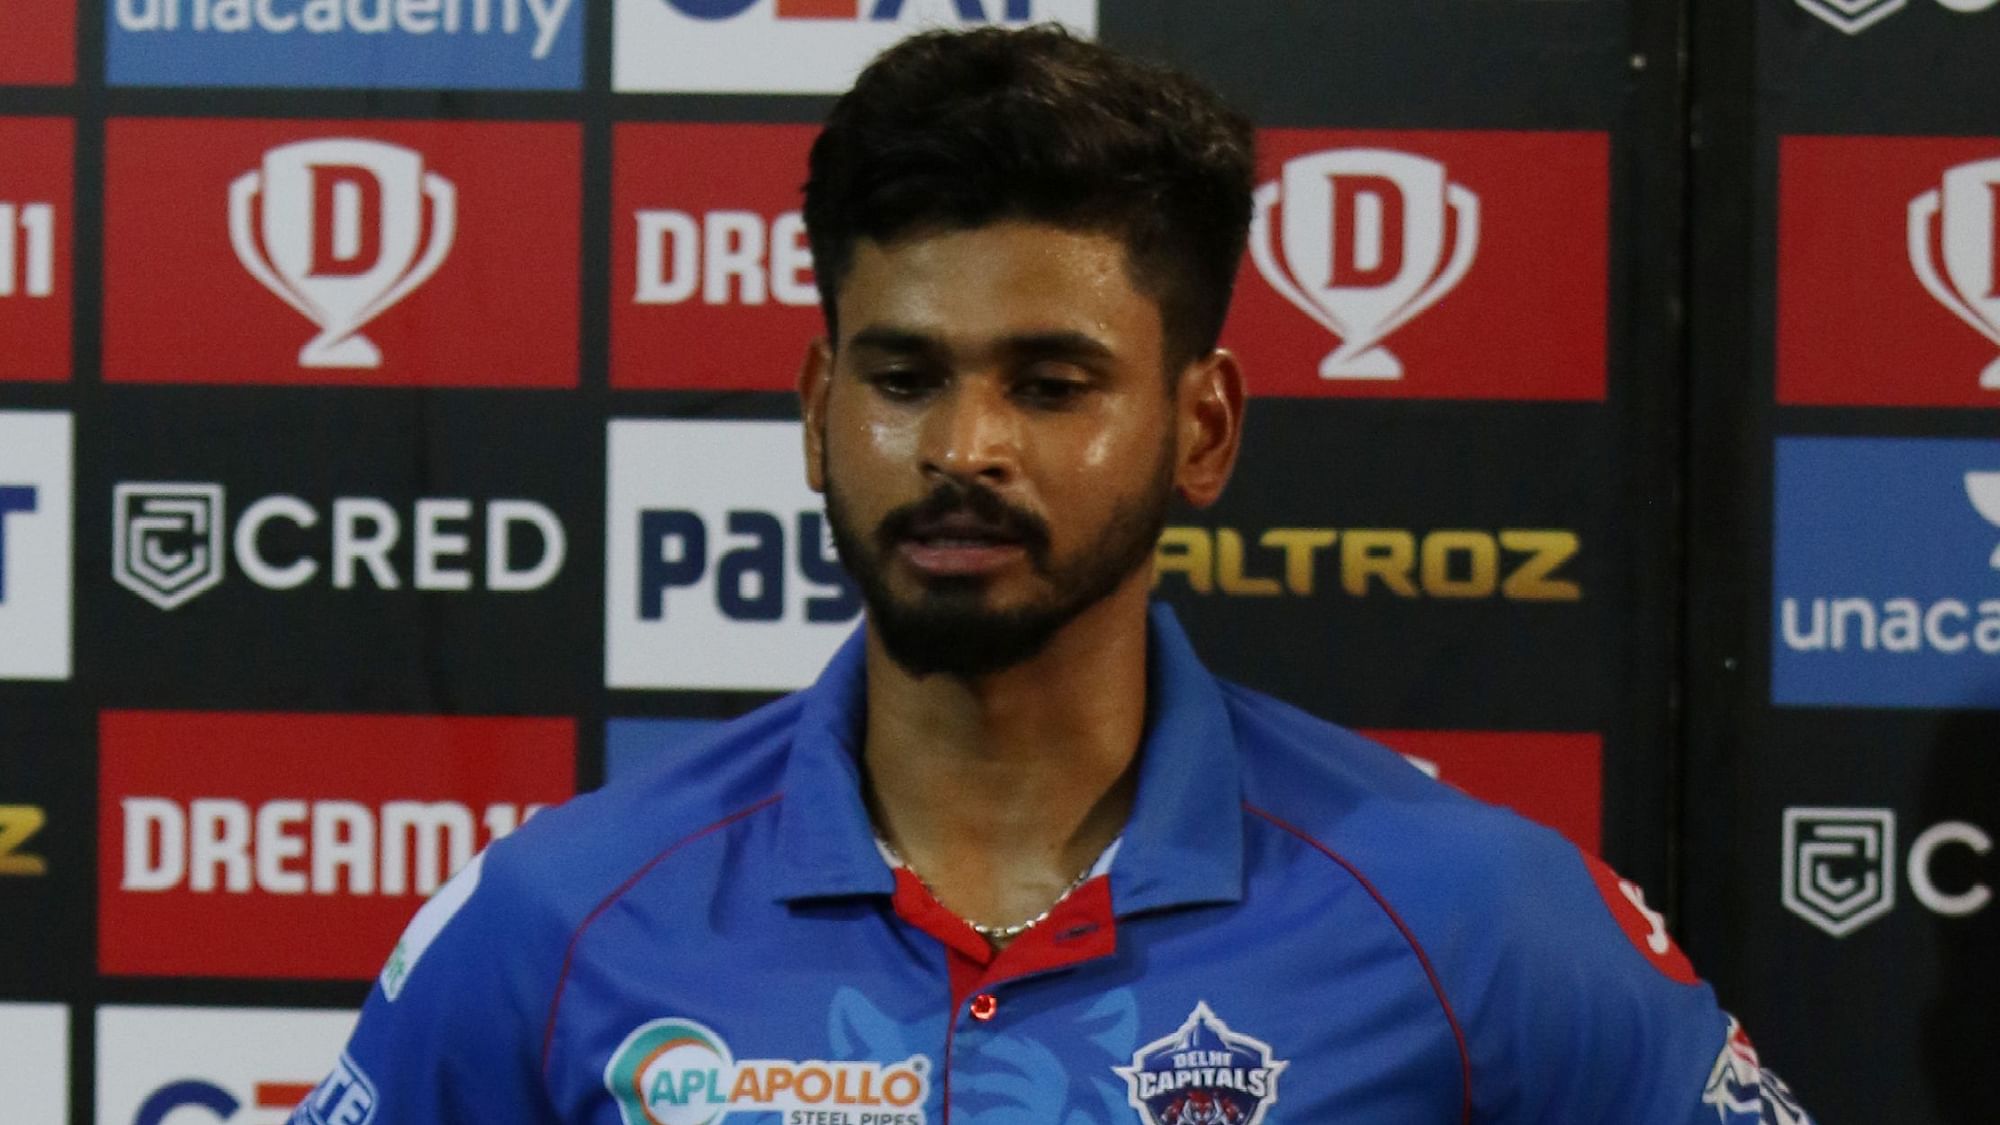 Delhi captain Shreyas Iyer said that they were surprised with the way the pitch behaved during their innings.